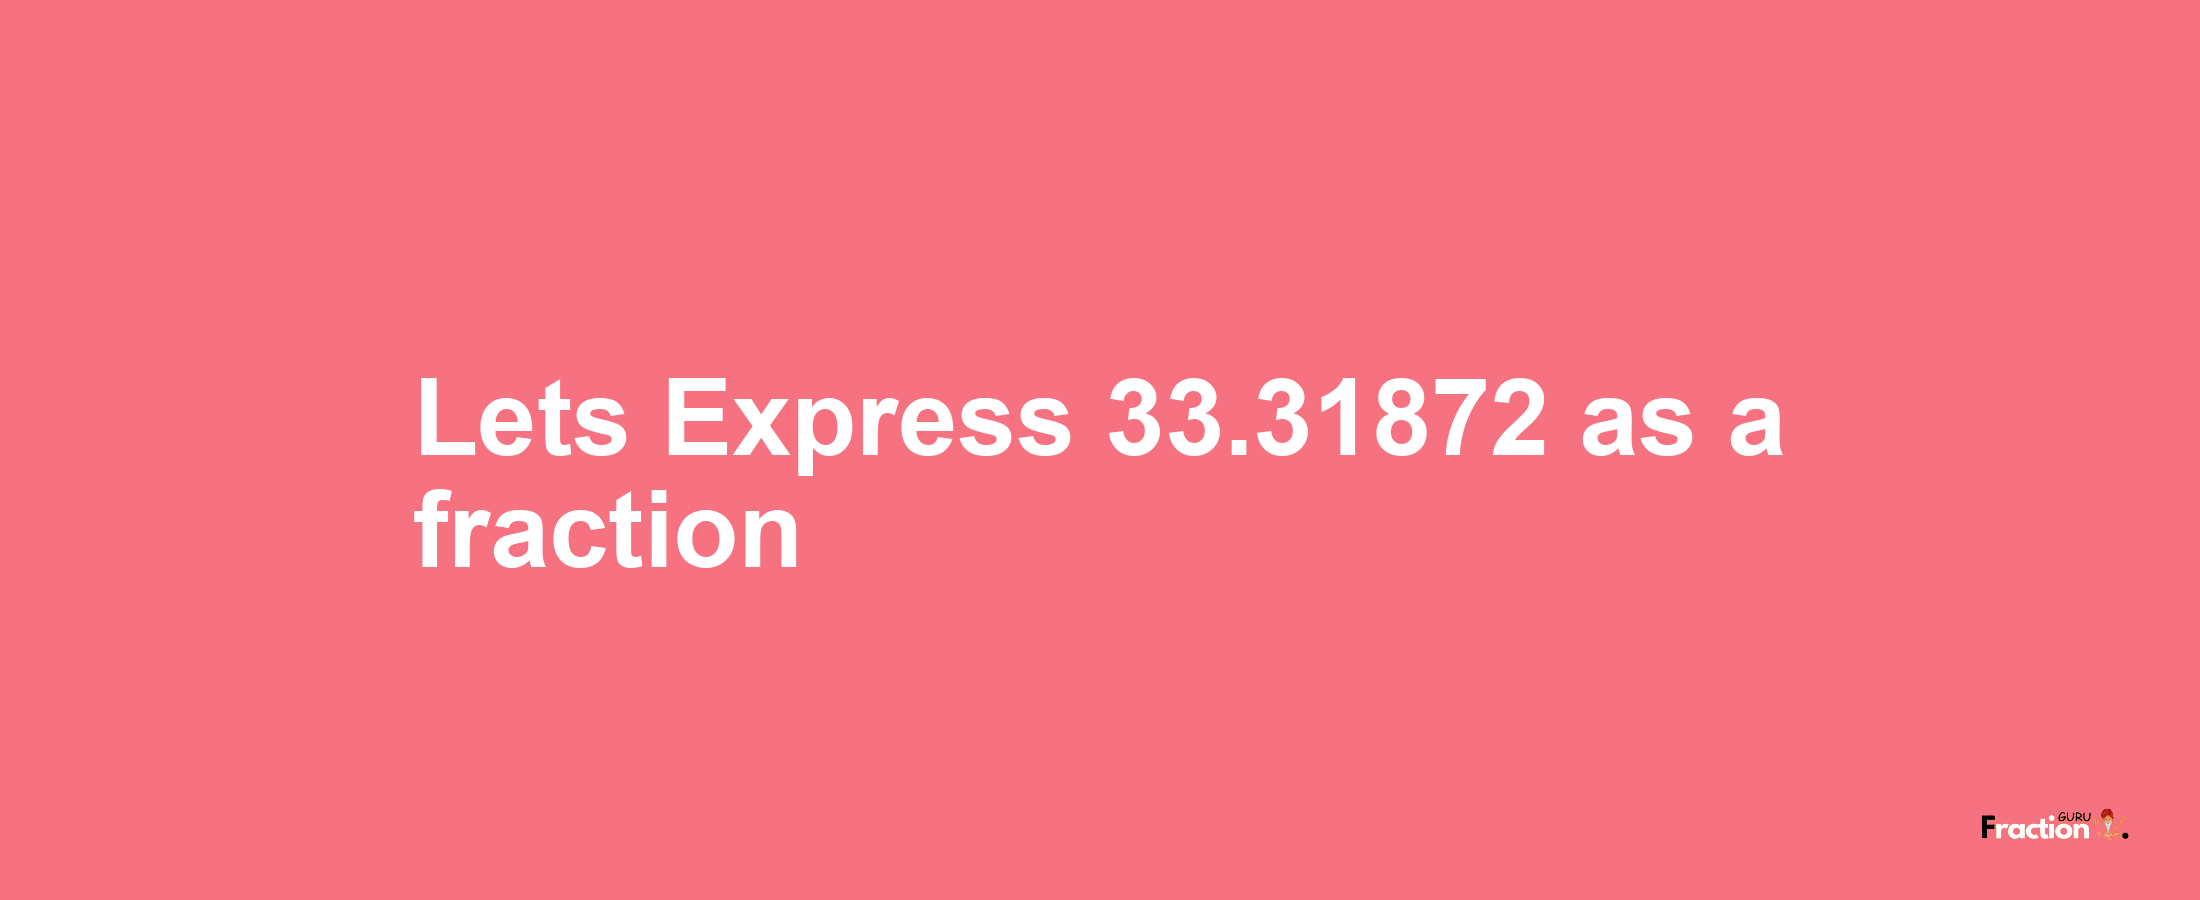 Lets Express 33.31872 as afraction